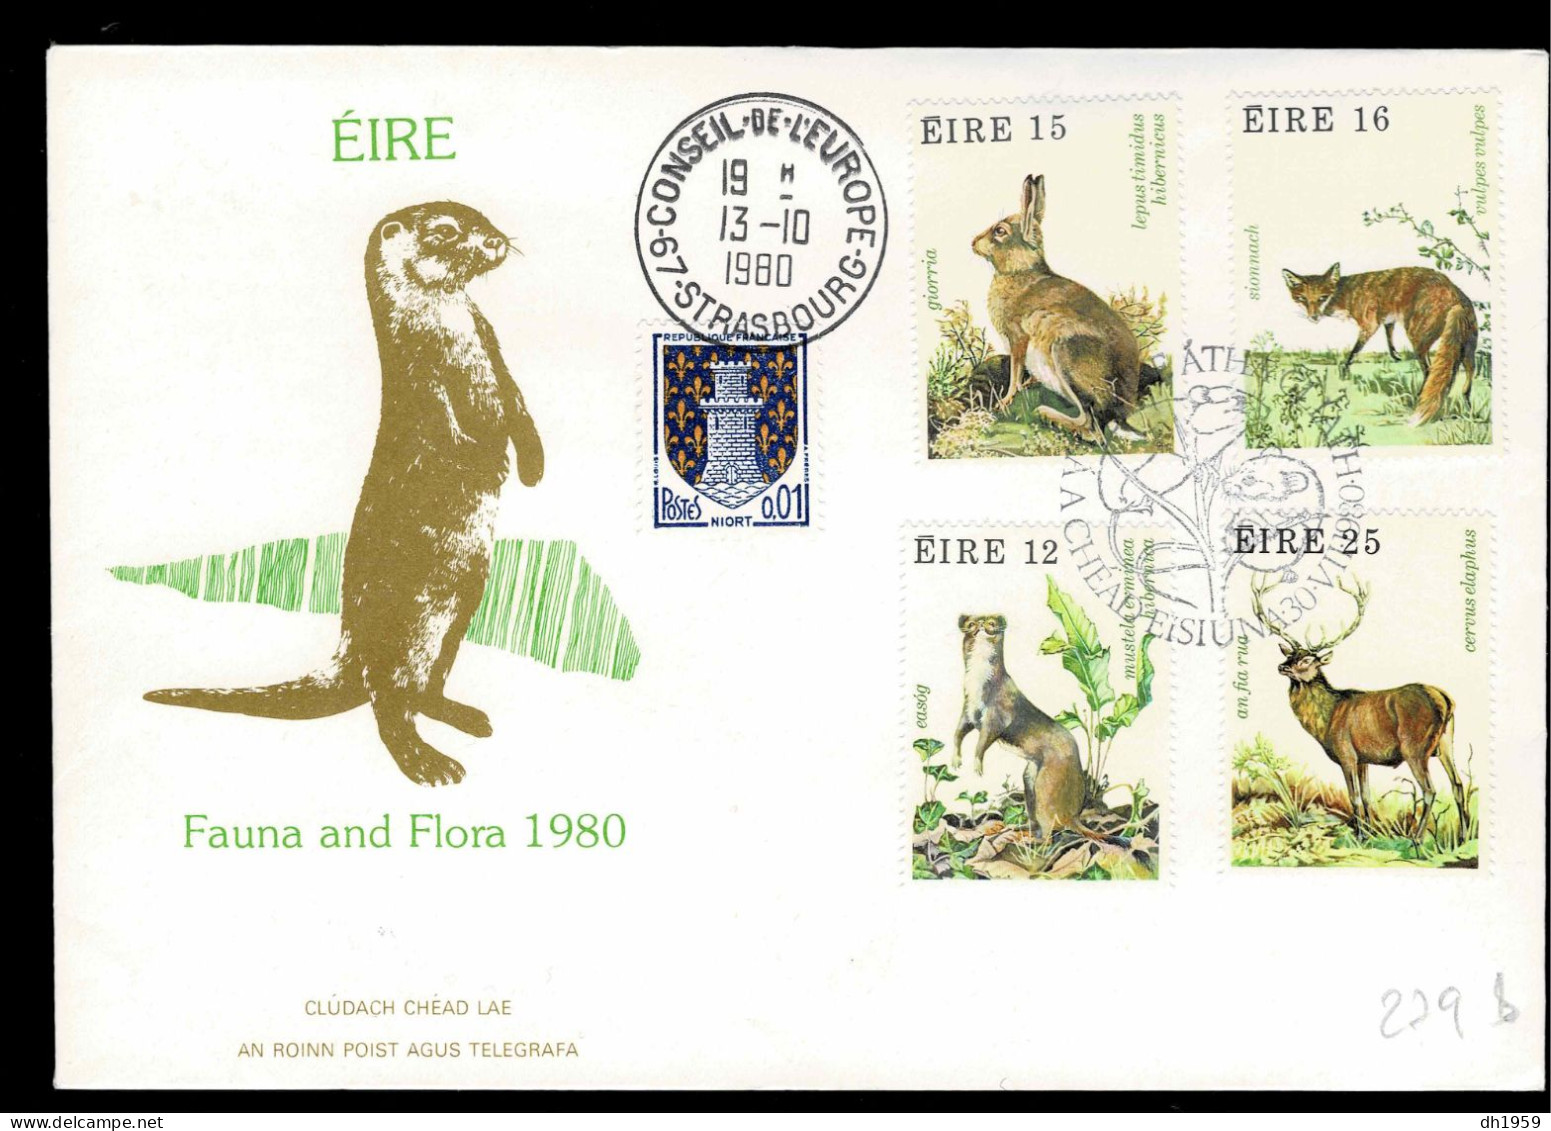 IRLANDE IRELAND EIRE FAUNA And FLORA FAUNE FLORE  CONSEIL EUROPE TIRAGE LIMITE LIMITED EDITION 75 Ex - Covers & Documents